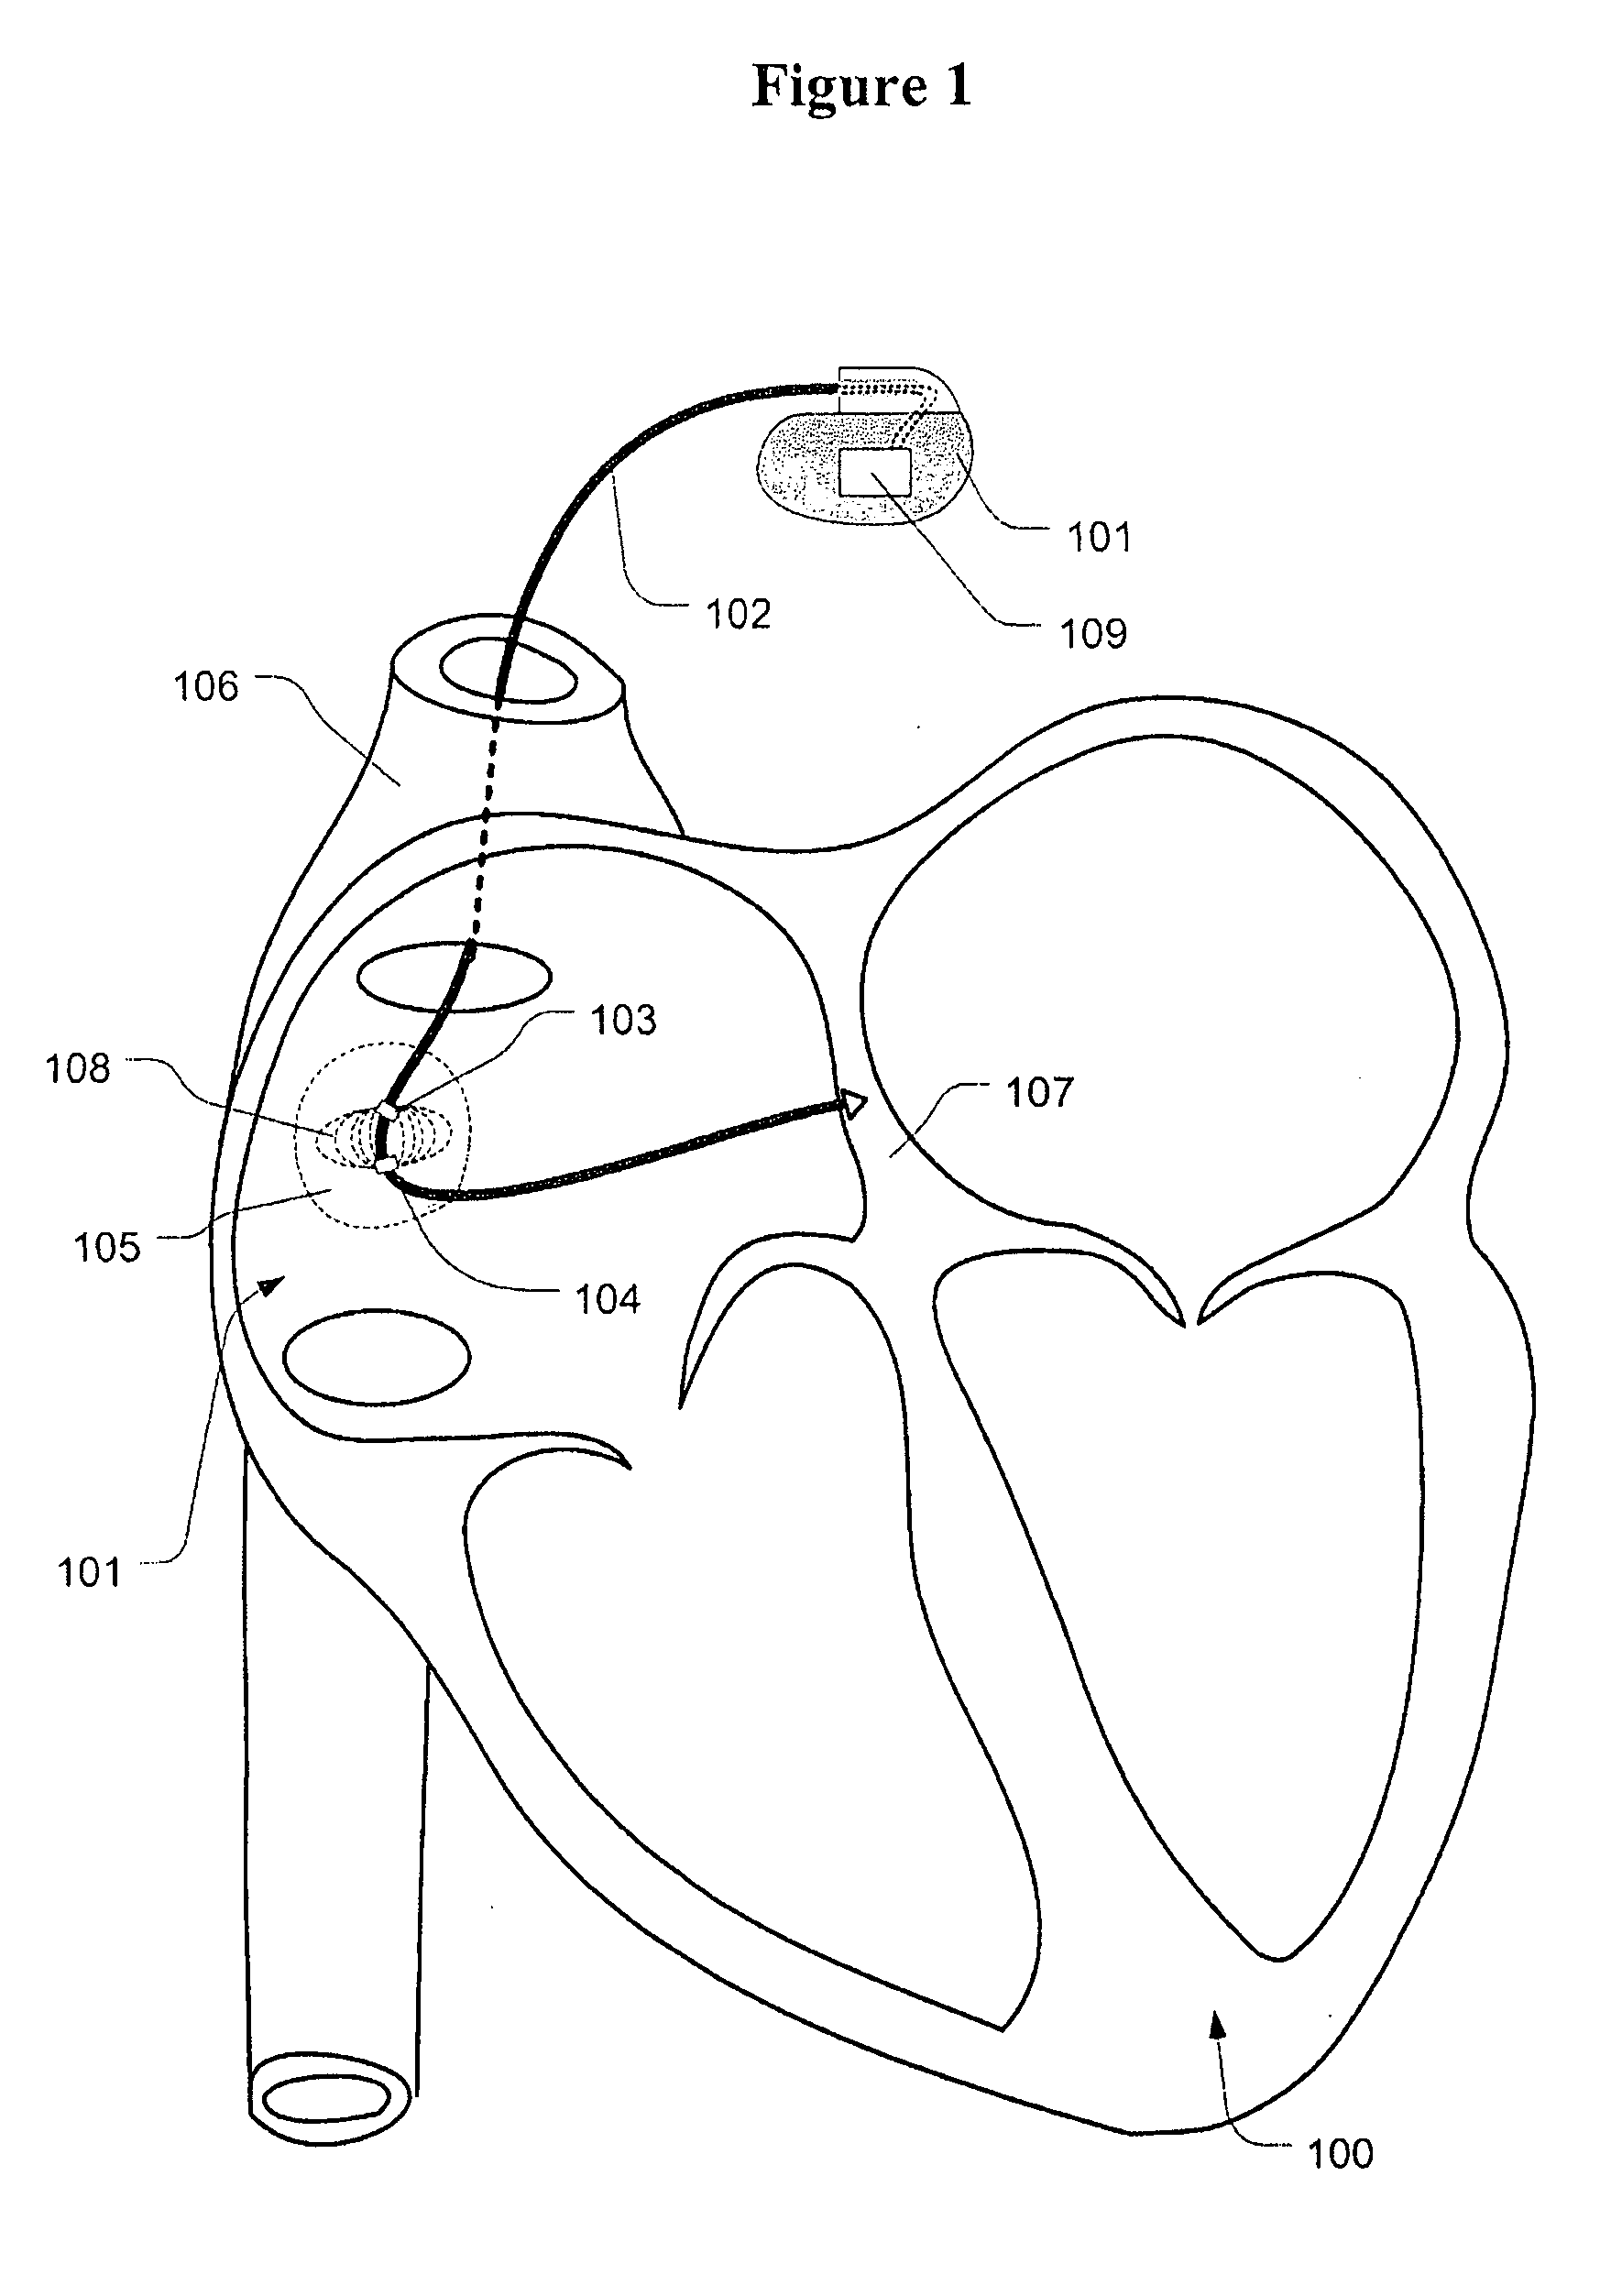 Heart rate reduction method and system